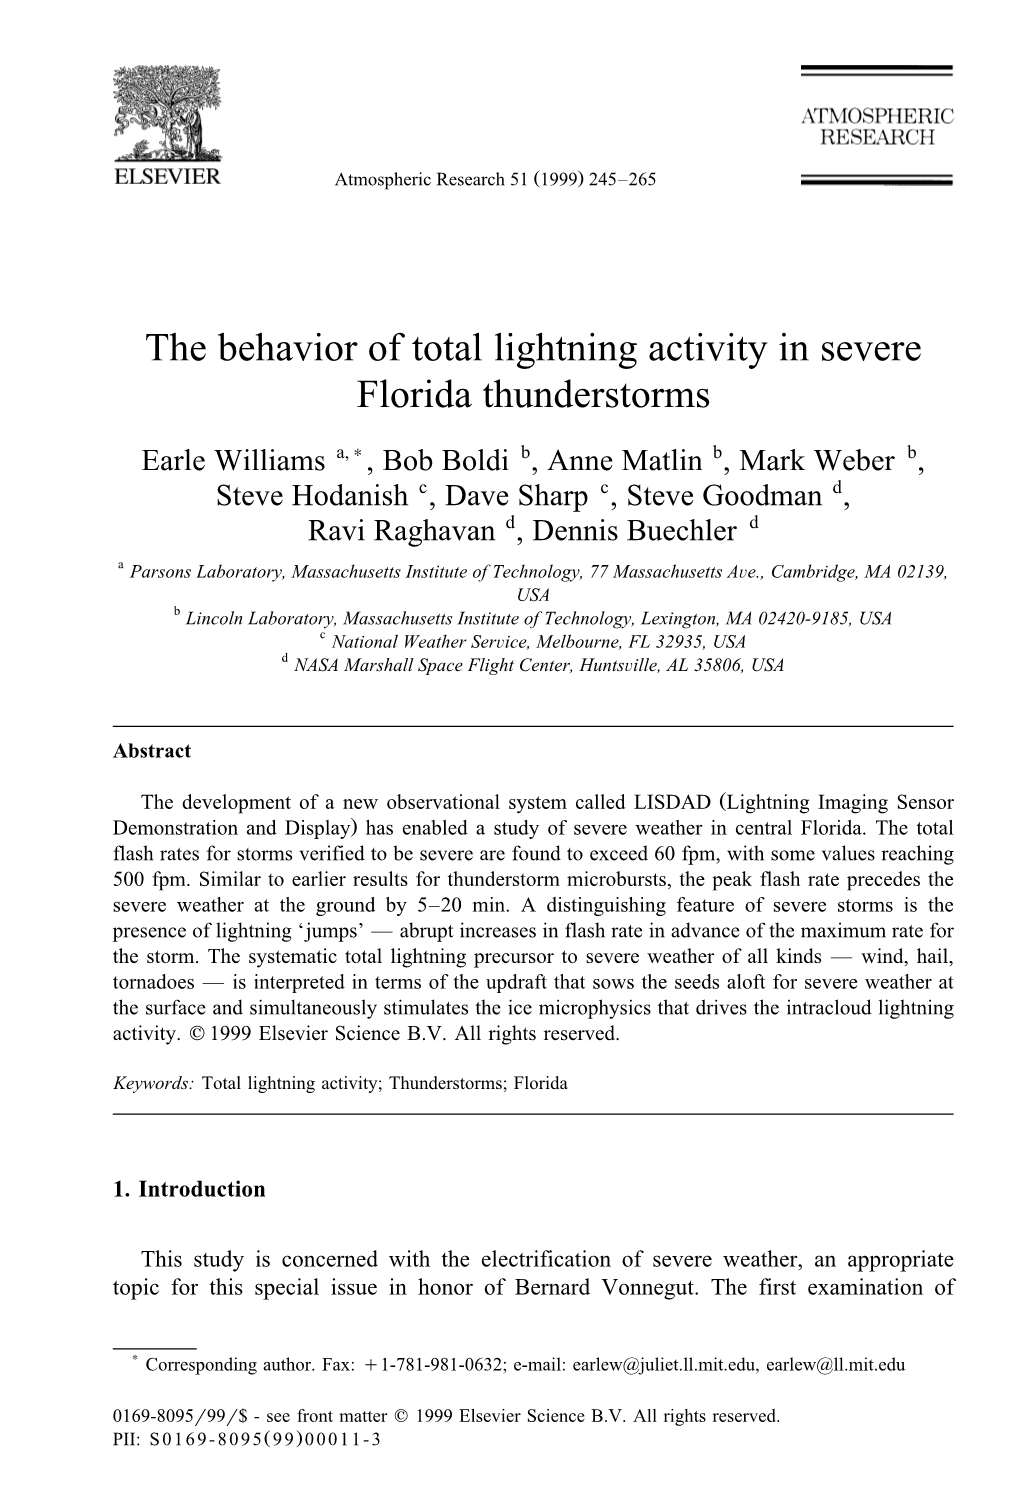 The Behavior of Total Lightning Activity in Severe Florida Thunderstorms